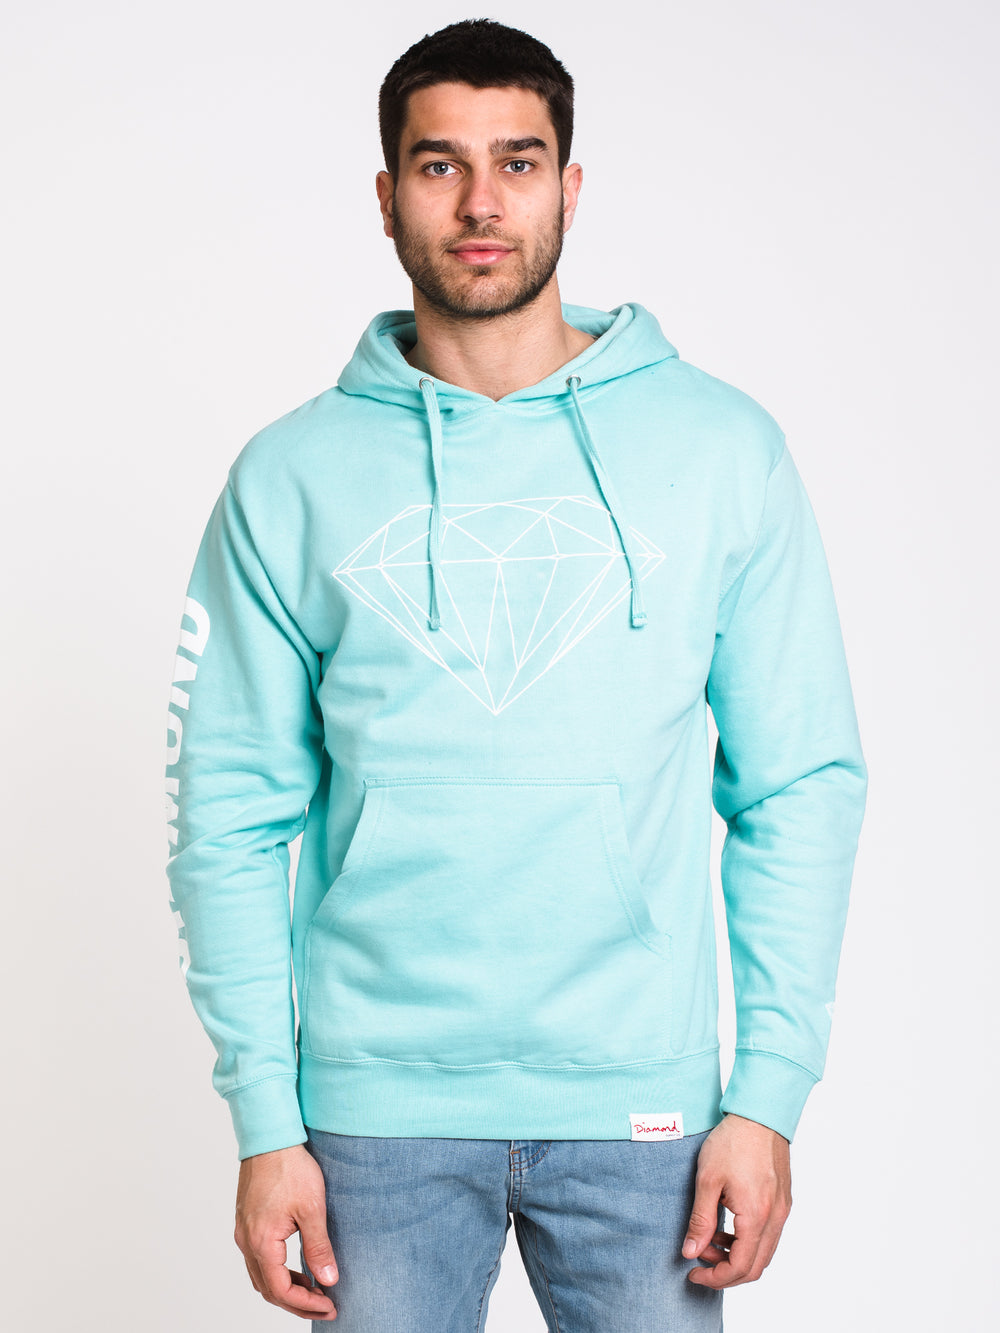 MENS BRILLIANT PULLOVER HOODIE- MINT - CLEARANCE